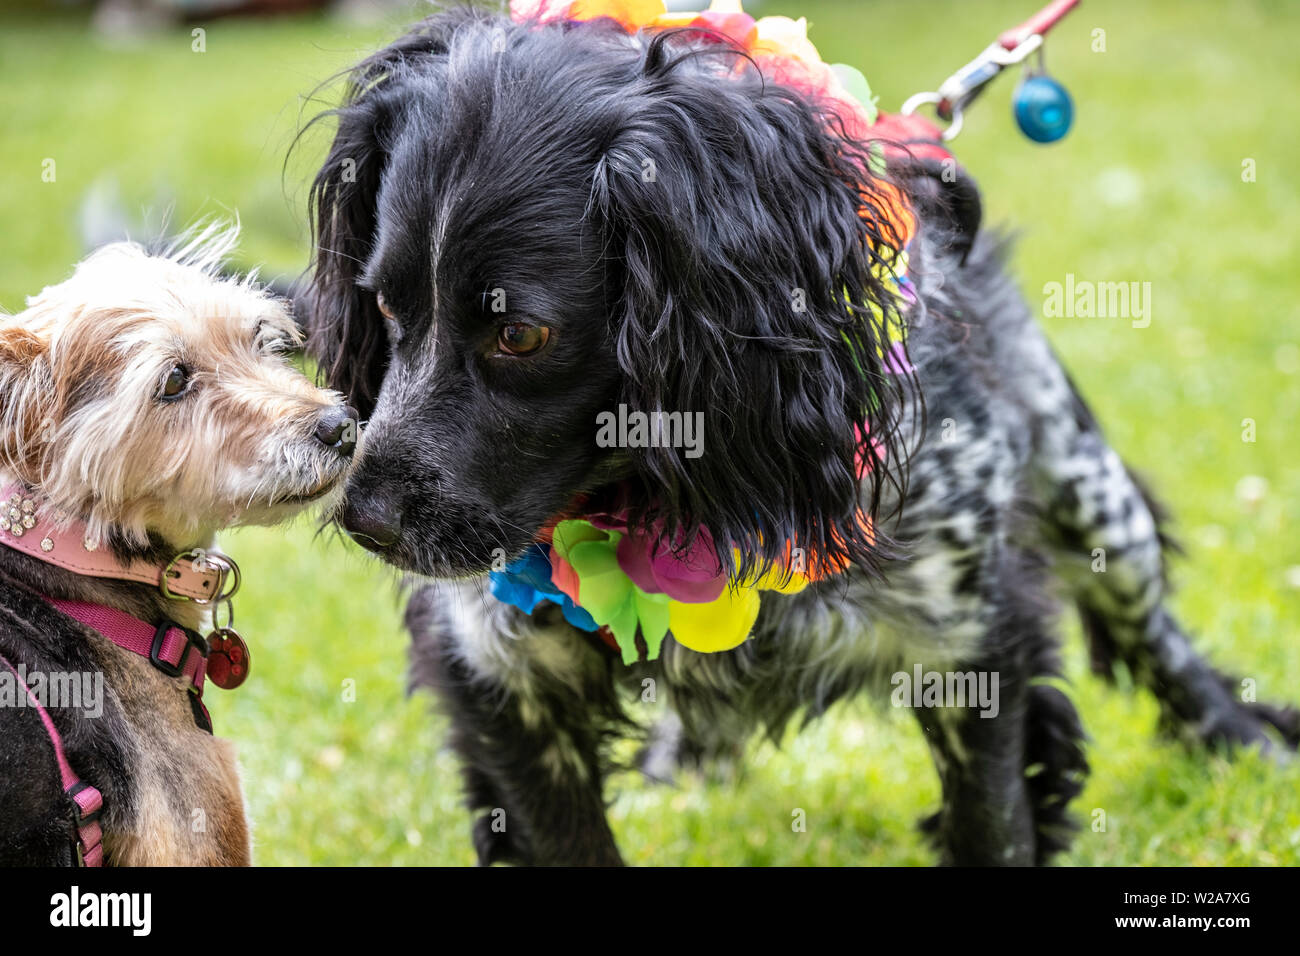 Bristol Pride Sog Show. 6 July 2019. Sniffing out the competition. Participants in the Pride Dog Show check each other out. Stock Photo